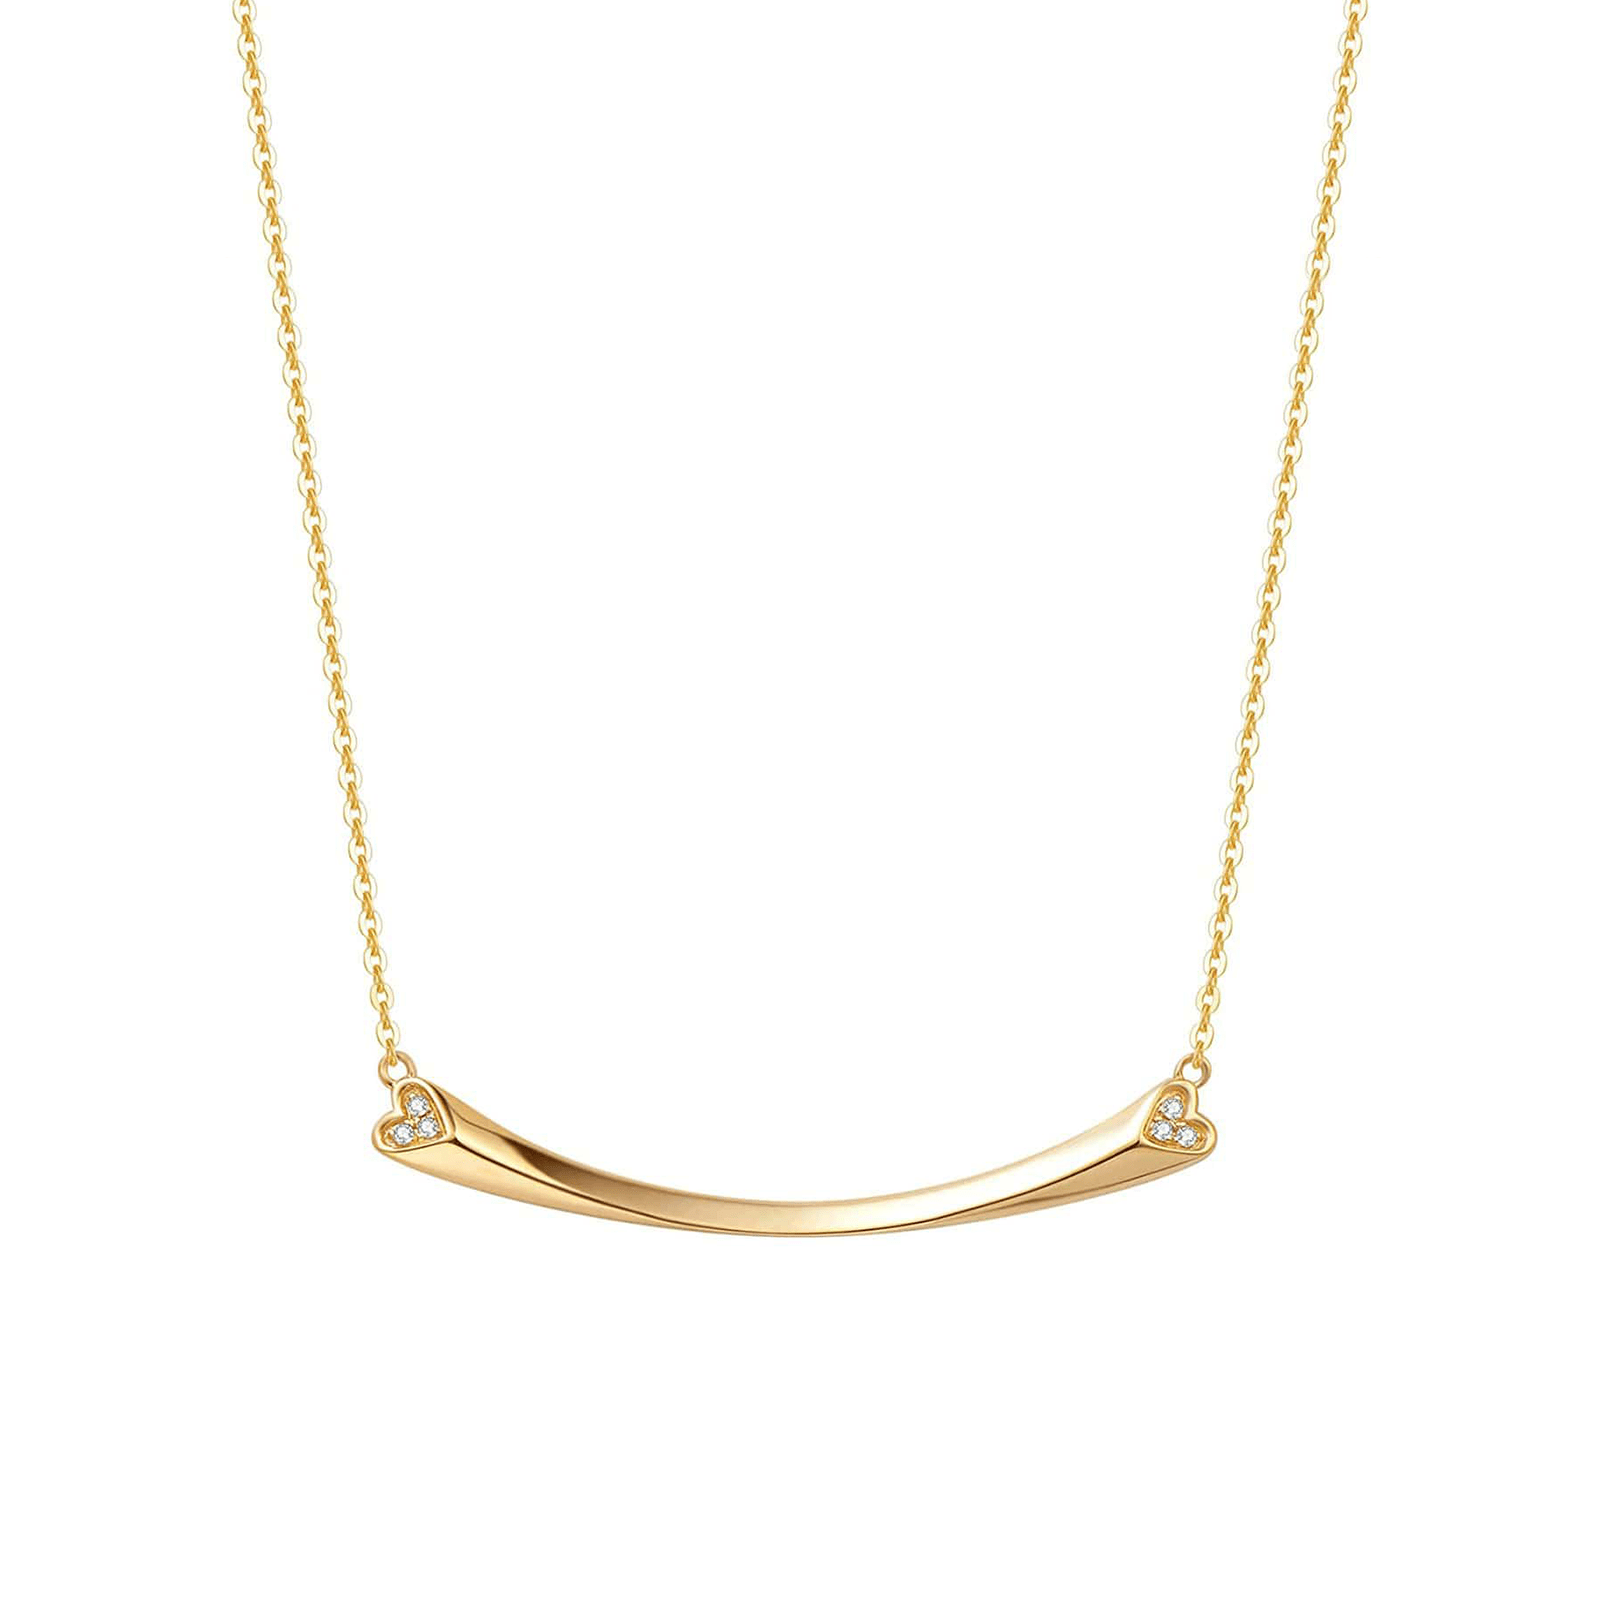 FANCIME "Hearty Smile" Bar 18K Real Solid Gold Necklace Main